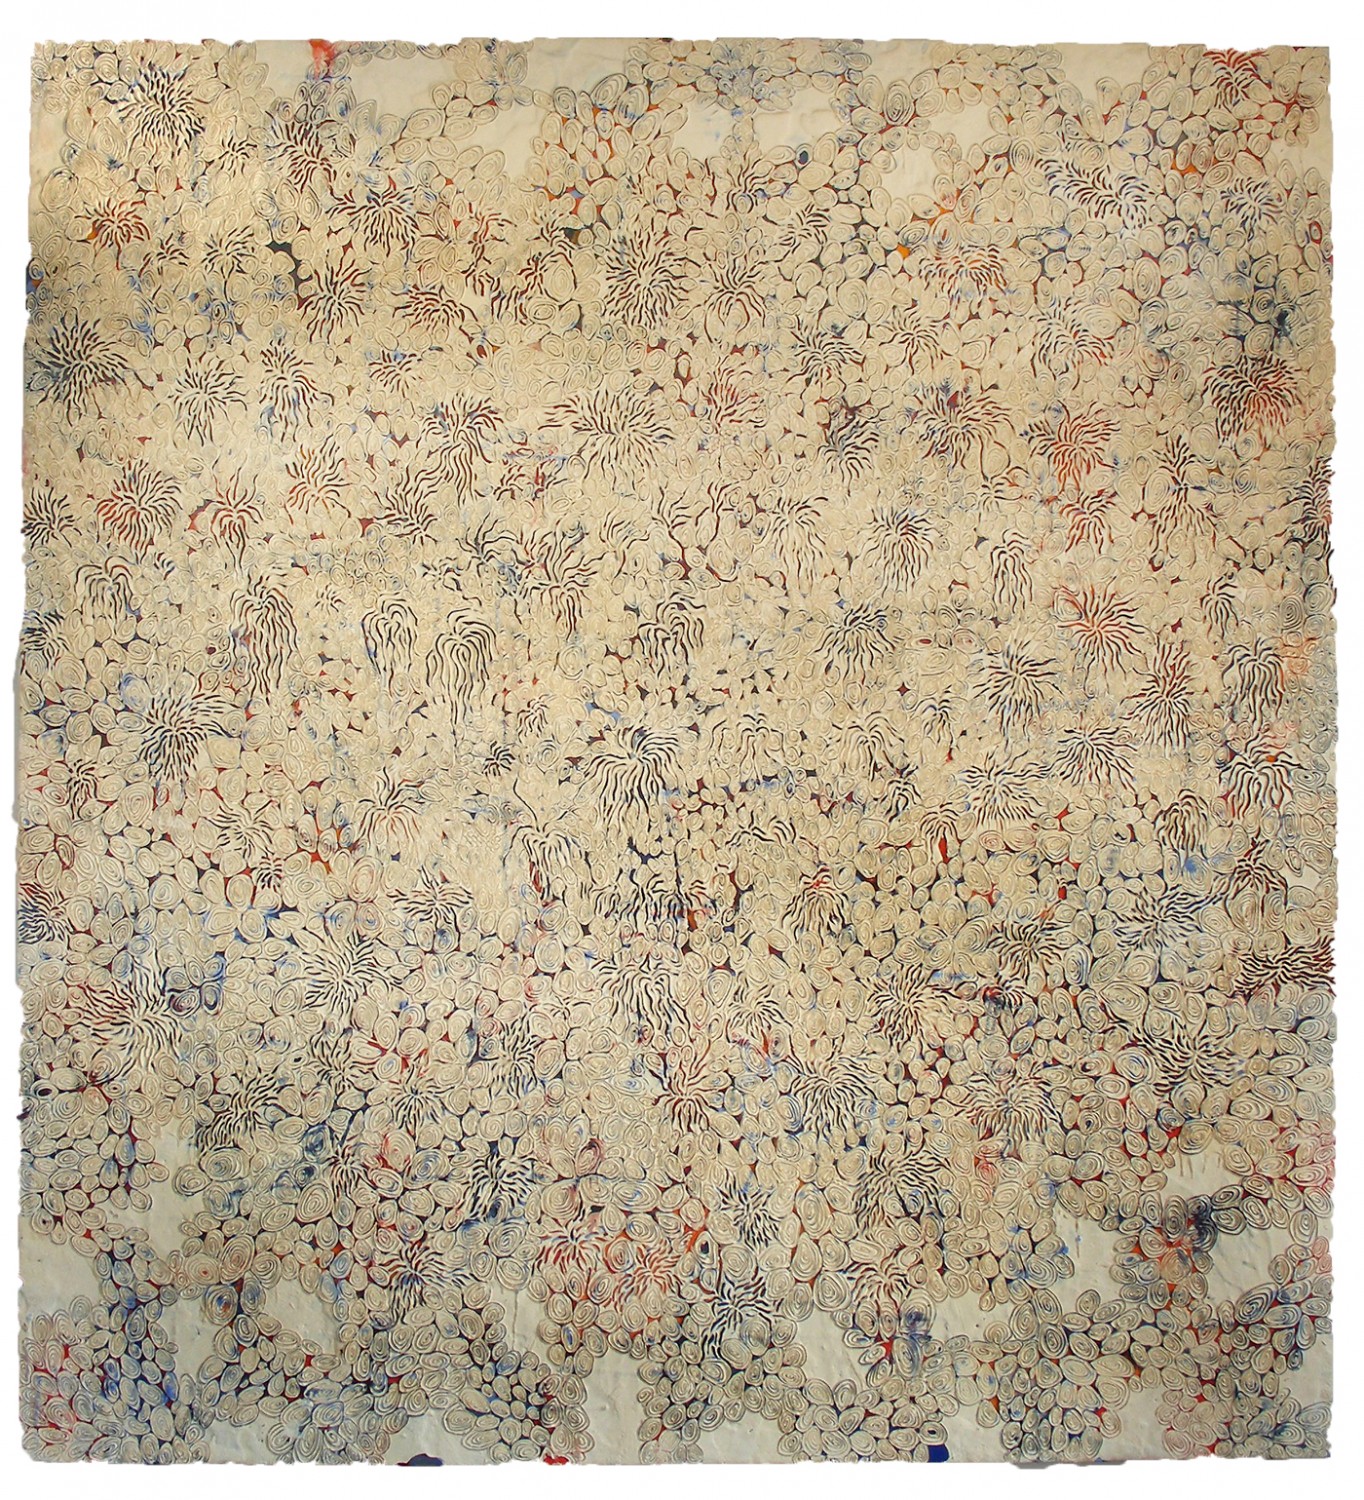 Id, 1999, encaustic on panel, 66 x 60 inches